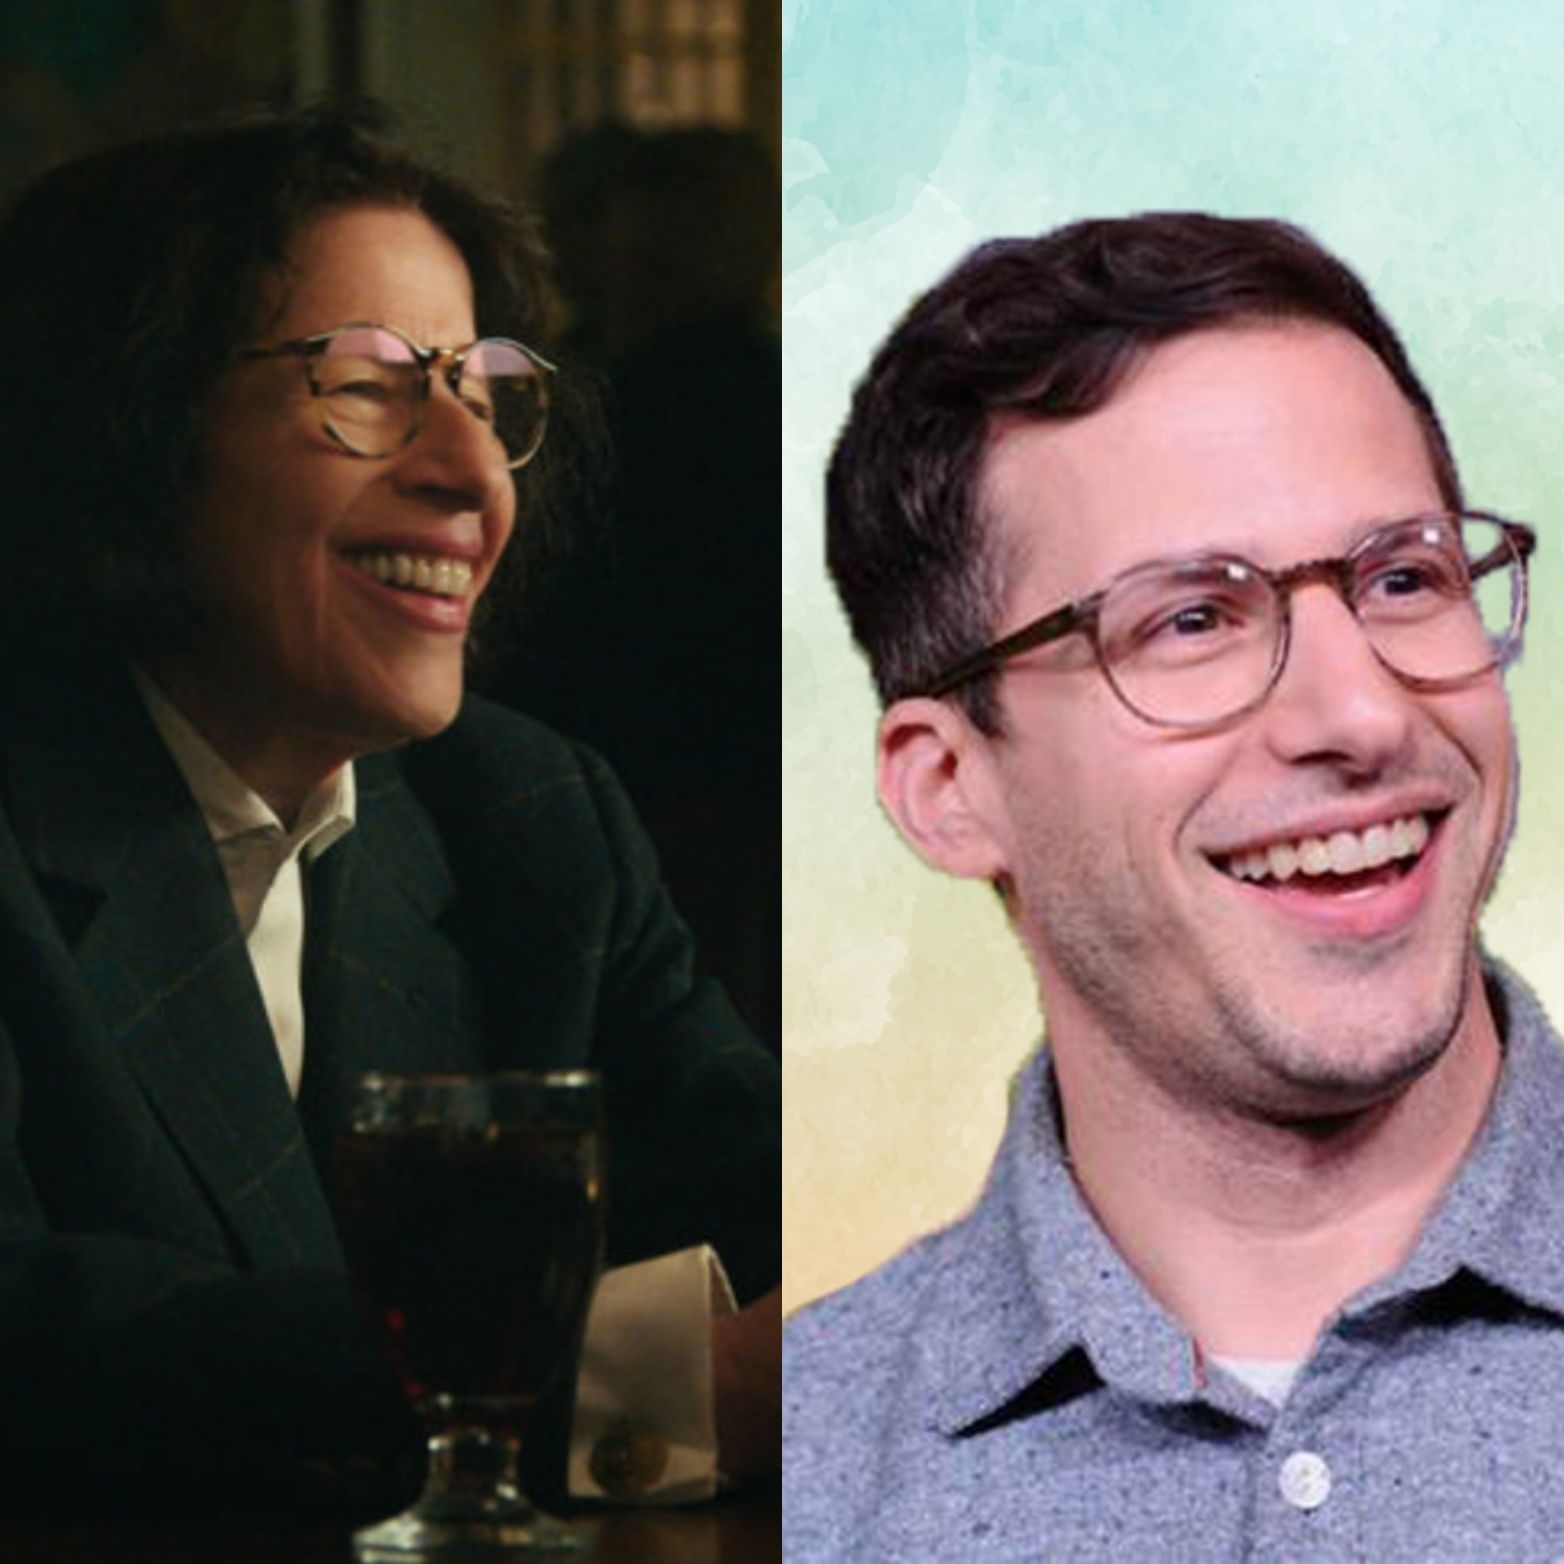 Fran Lebowitz looks like Andy Samberg playing the role of an old woman.